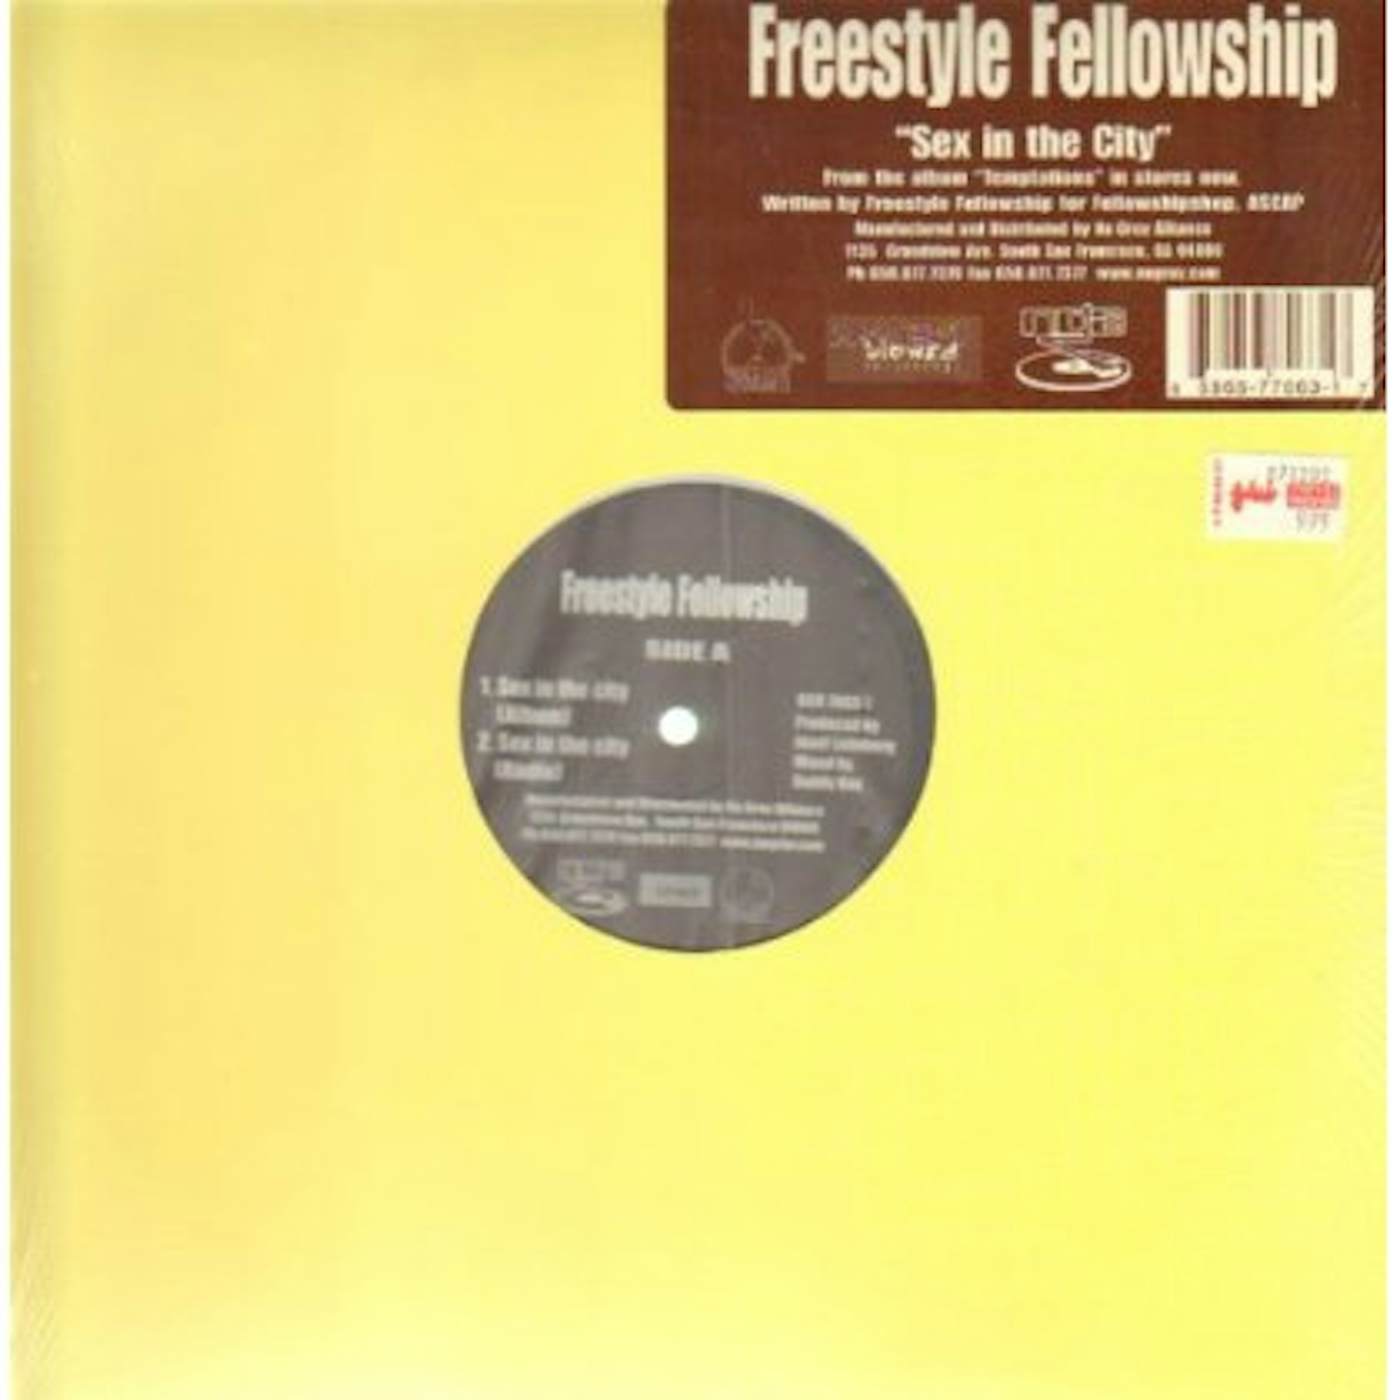 Freestyle Fellowship SEX IN THE CITY Vinyl Record